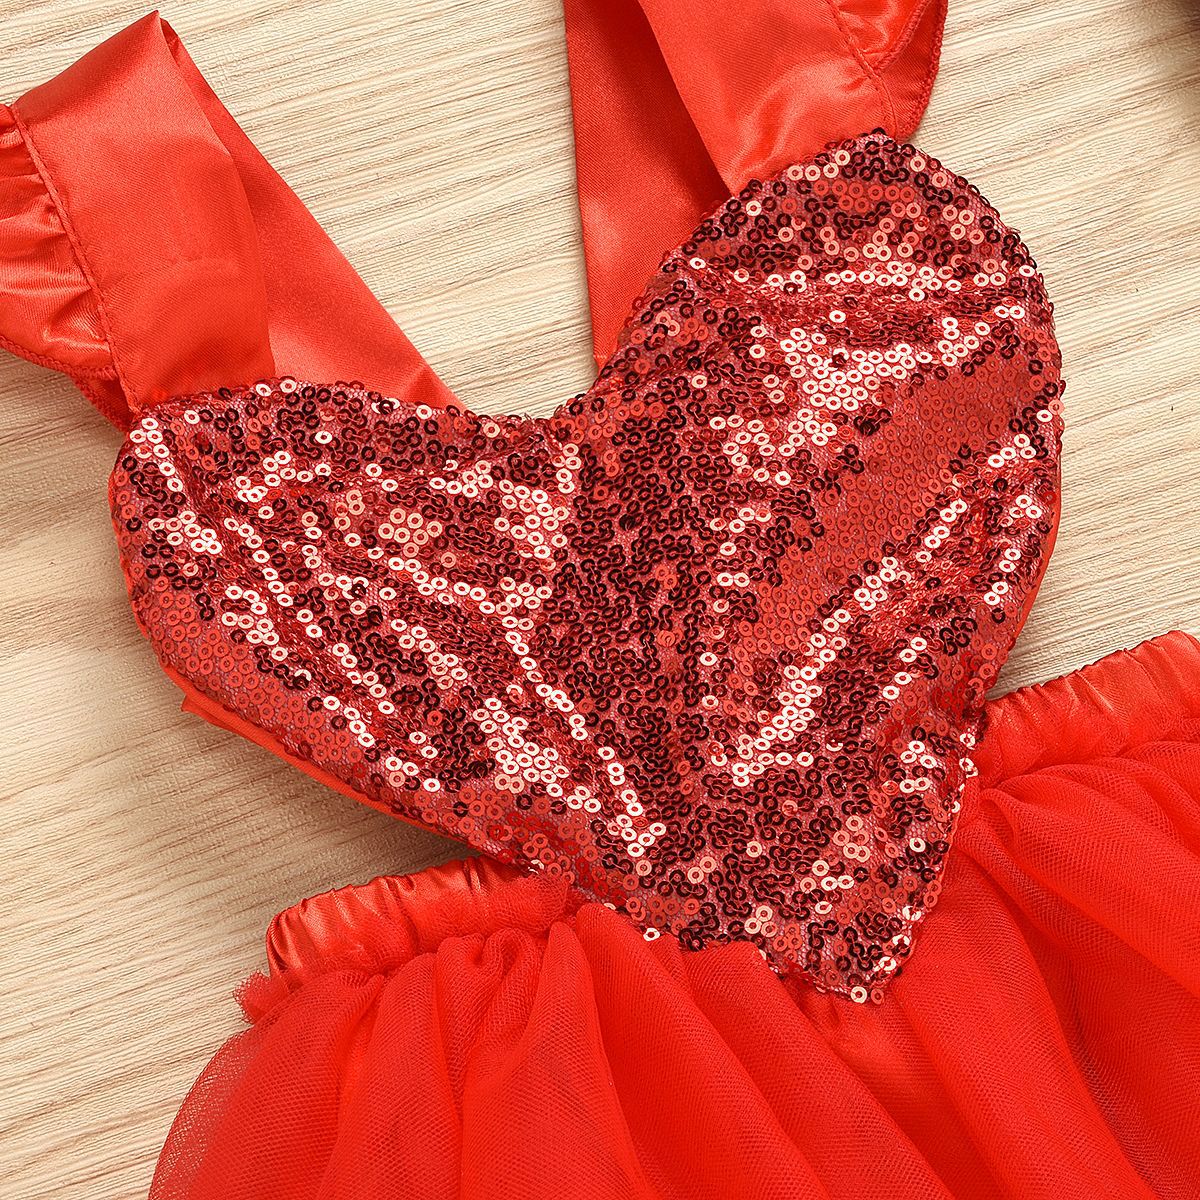 Valentines-Day-Baby-Girls-Dress-Party-Princess-Dresses-Red-Flying-Sleeve-Love-Heart-Sequined-Mesh-Stitching-3